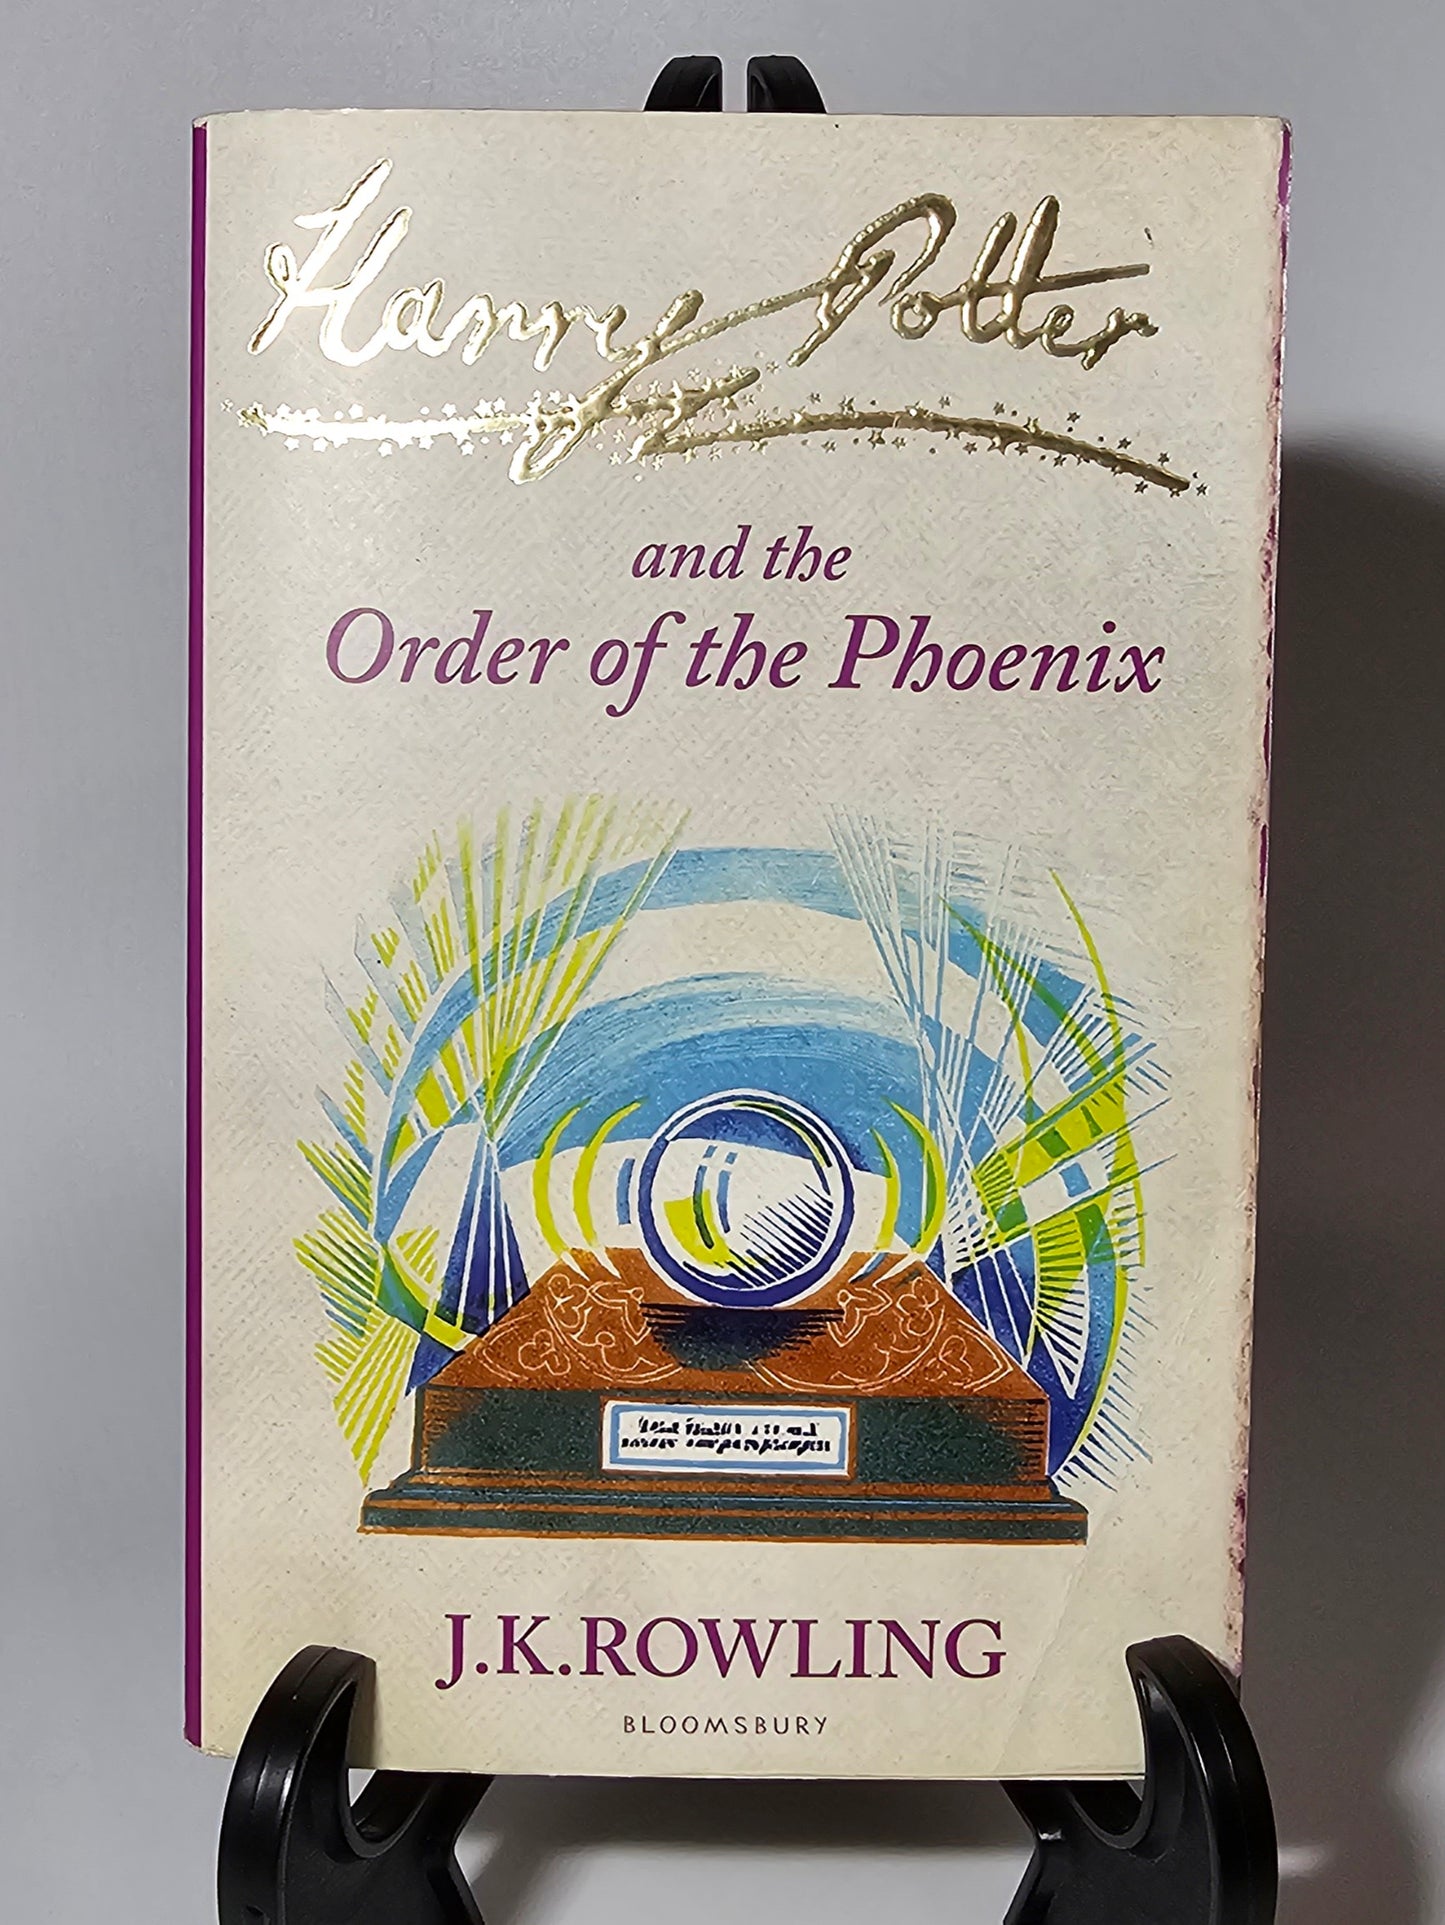 Harry Potter and the Order of the Phoenix by J.K. Rowling (Harry Potter Series #5)